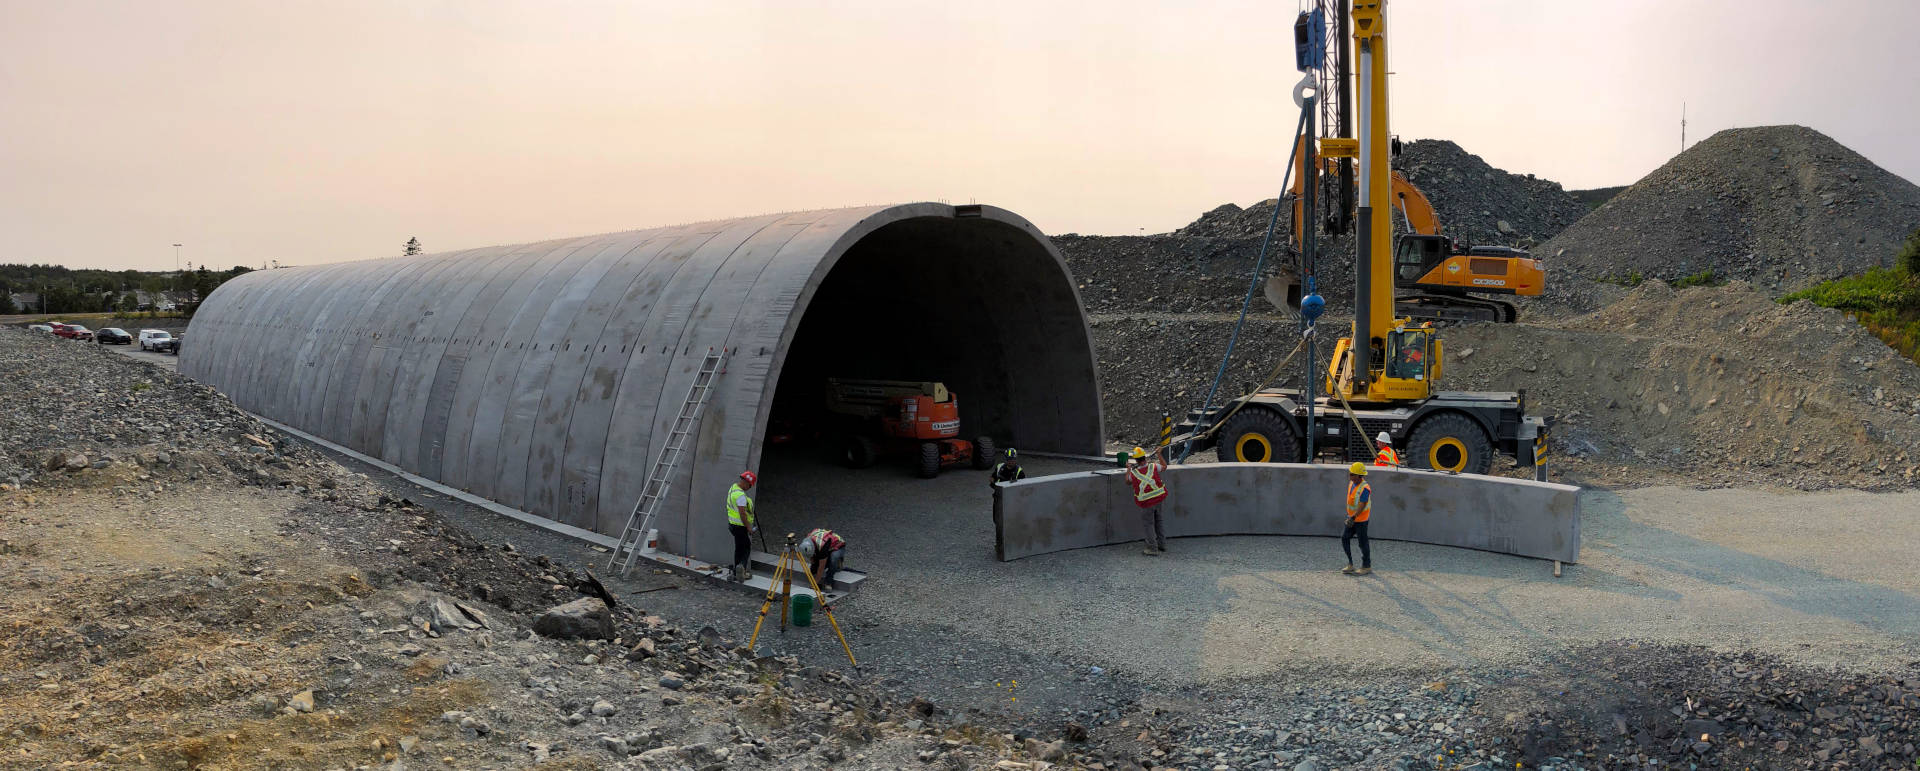 Alignment and millimeter-accurate shimming of a pre-cast concrete tunnel.